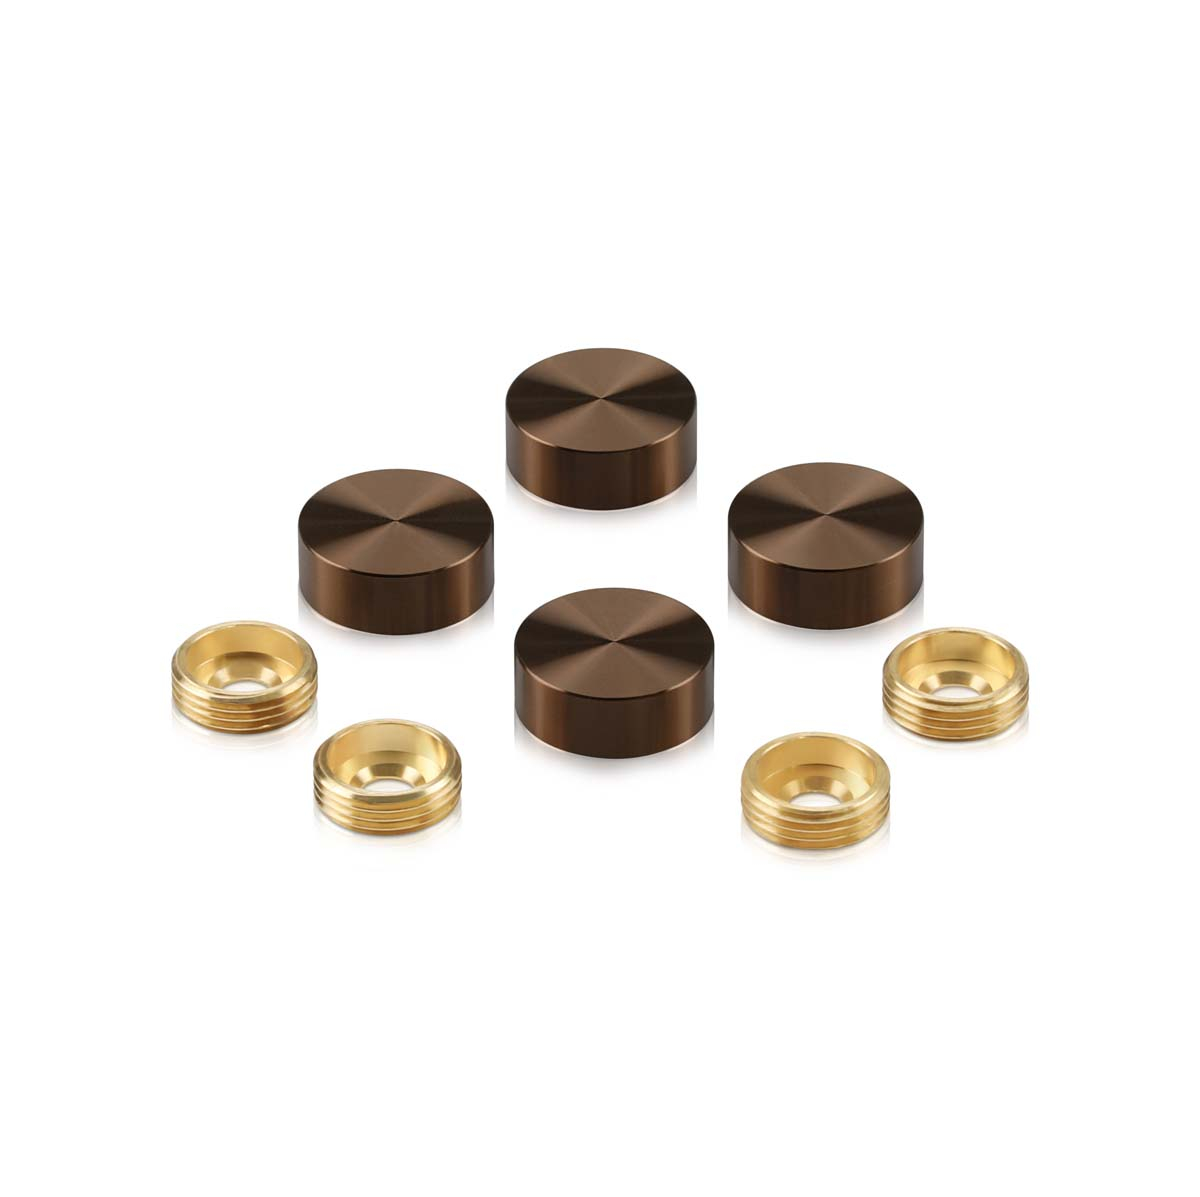 Set of 4 Screw Cover, Diameter: 3/4'', Aluminum Bronze Anodized Finish (Indoor or Outdoor Use), Special for 3/16'' Diameter TAPCON Screw Slotted Hex (TAPCON Screw Sold Separatly)